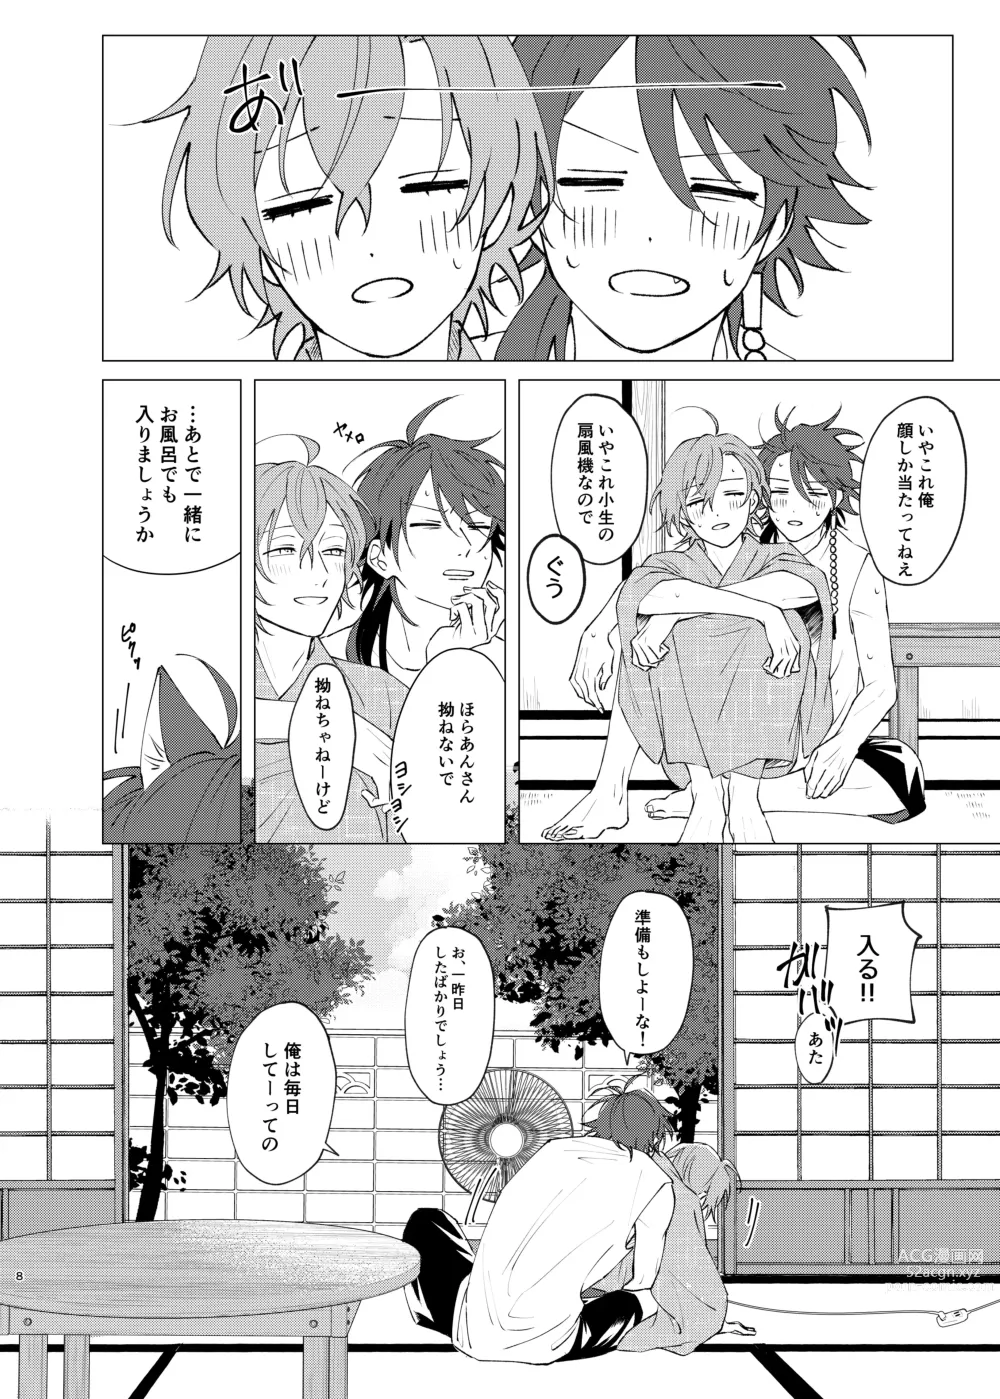 Page 6 of doujinshi Im leaving for good.